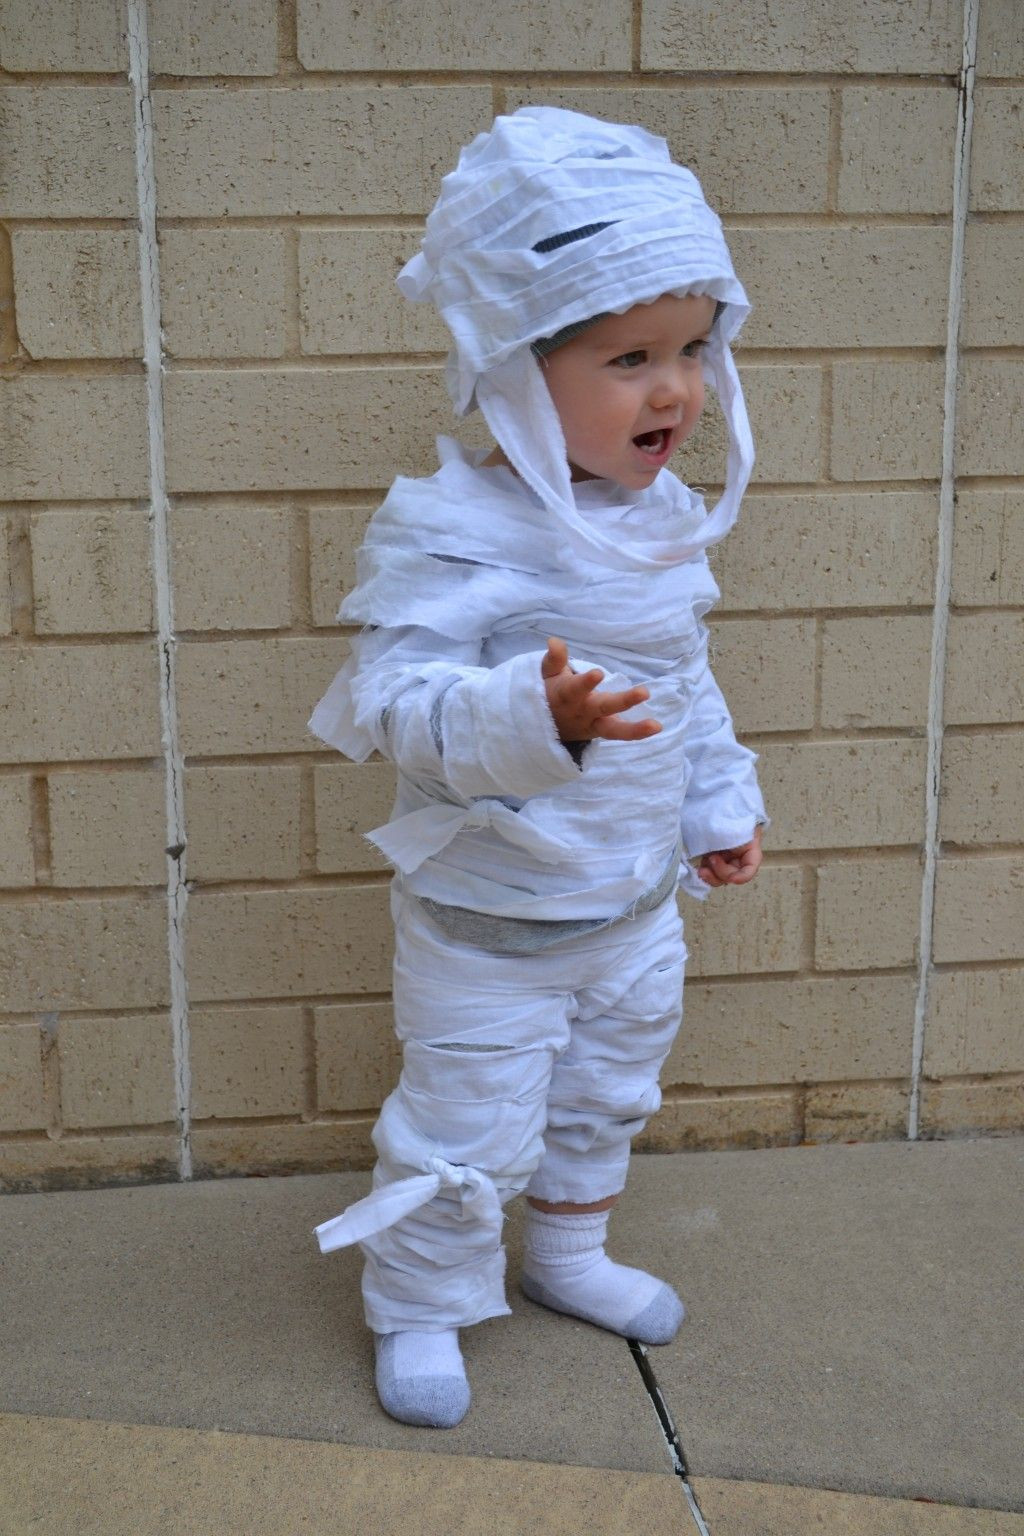 DIY Halloween Costumes For Toddler Boys
 How To Make An Easy No Sew Child s Mummy Costume